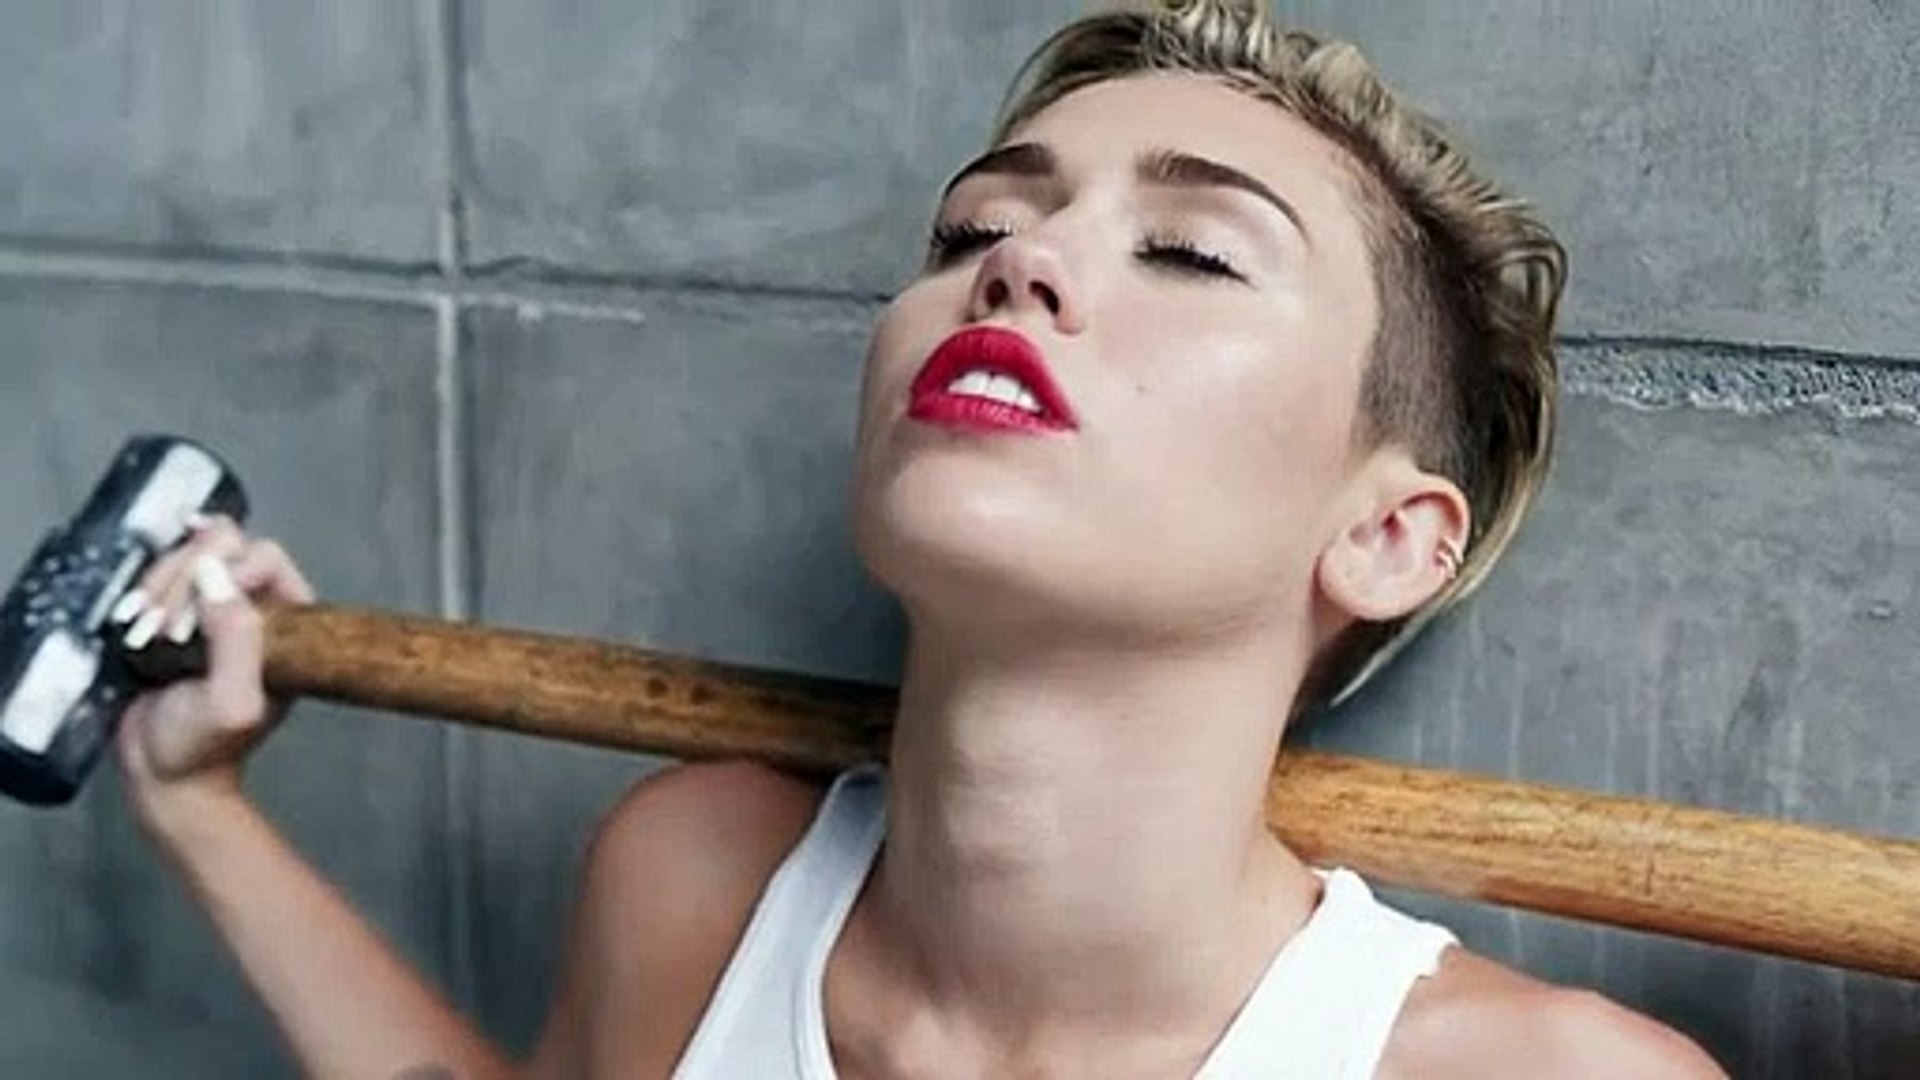 Miley Cyrus - Wrecking Ball - Vídeo Dailymotion